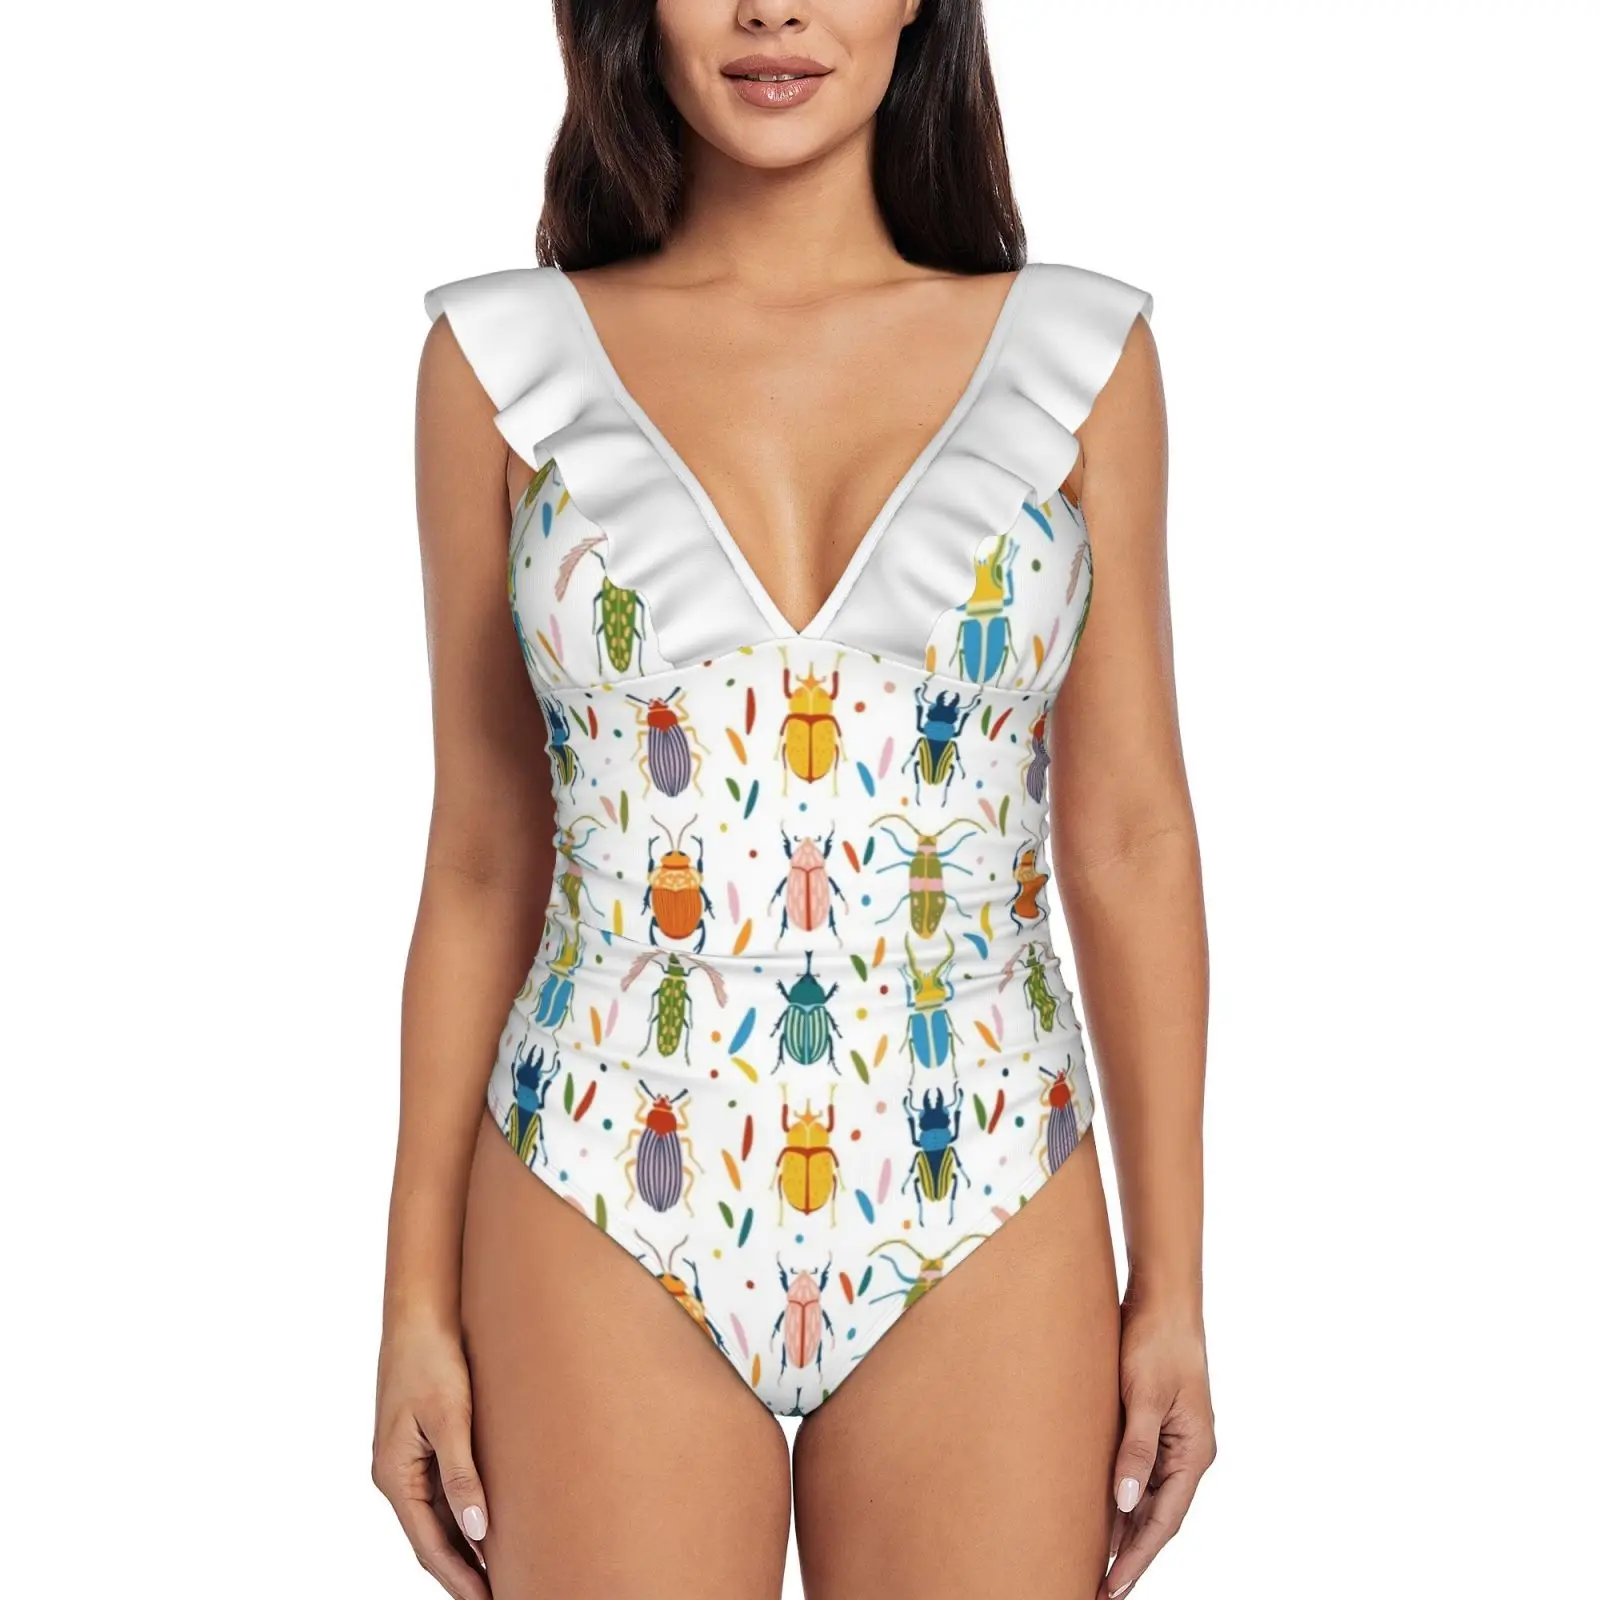 

Colourful Beetles Ruffled One-Piece Swimsuit Women Sexy Monokini Swimwear New Beach Bathing Suits Beetles Spring Bugs Insects